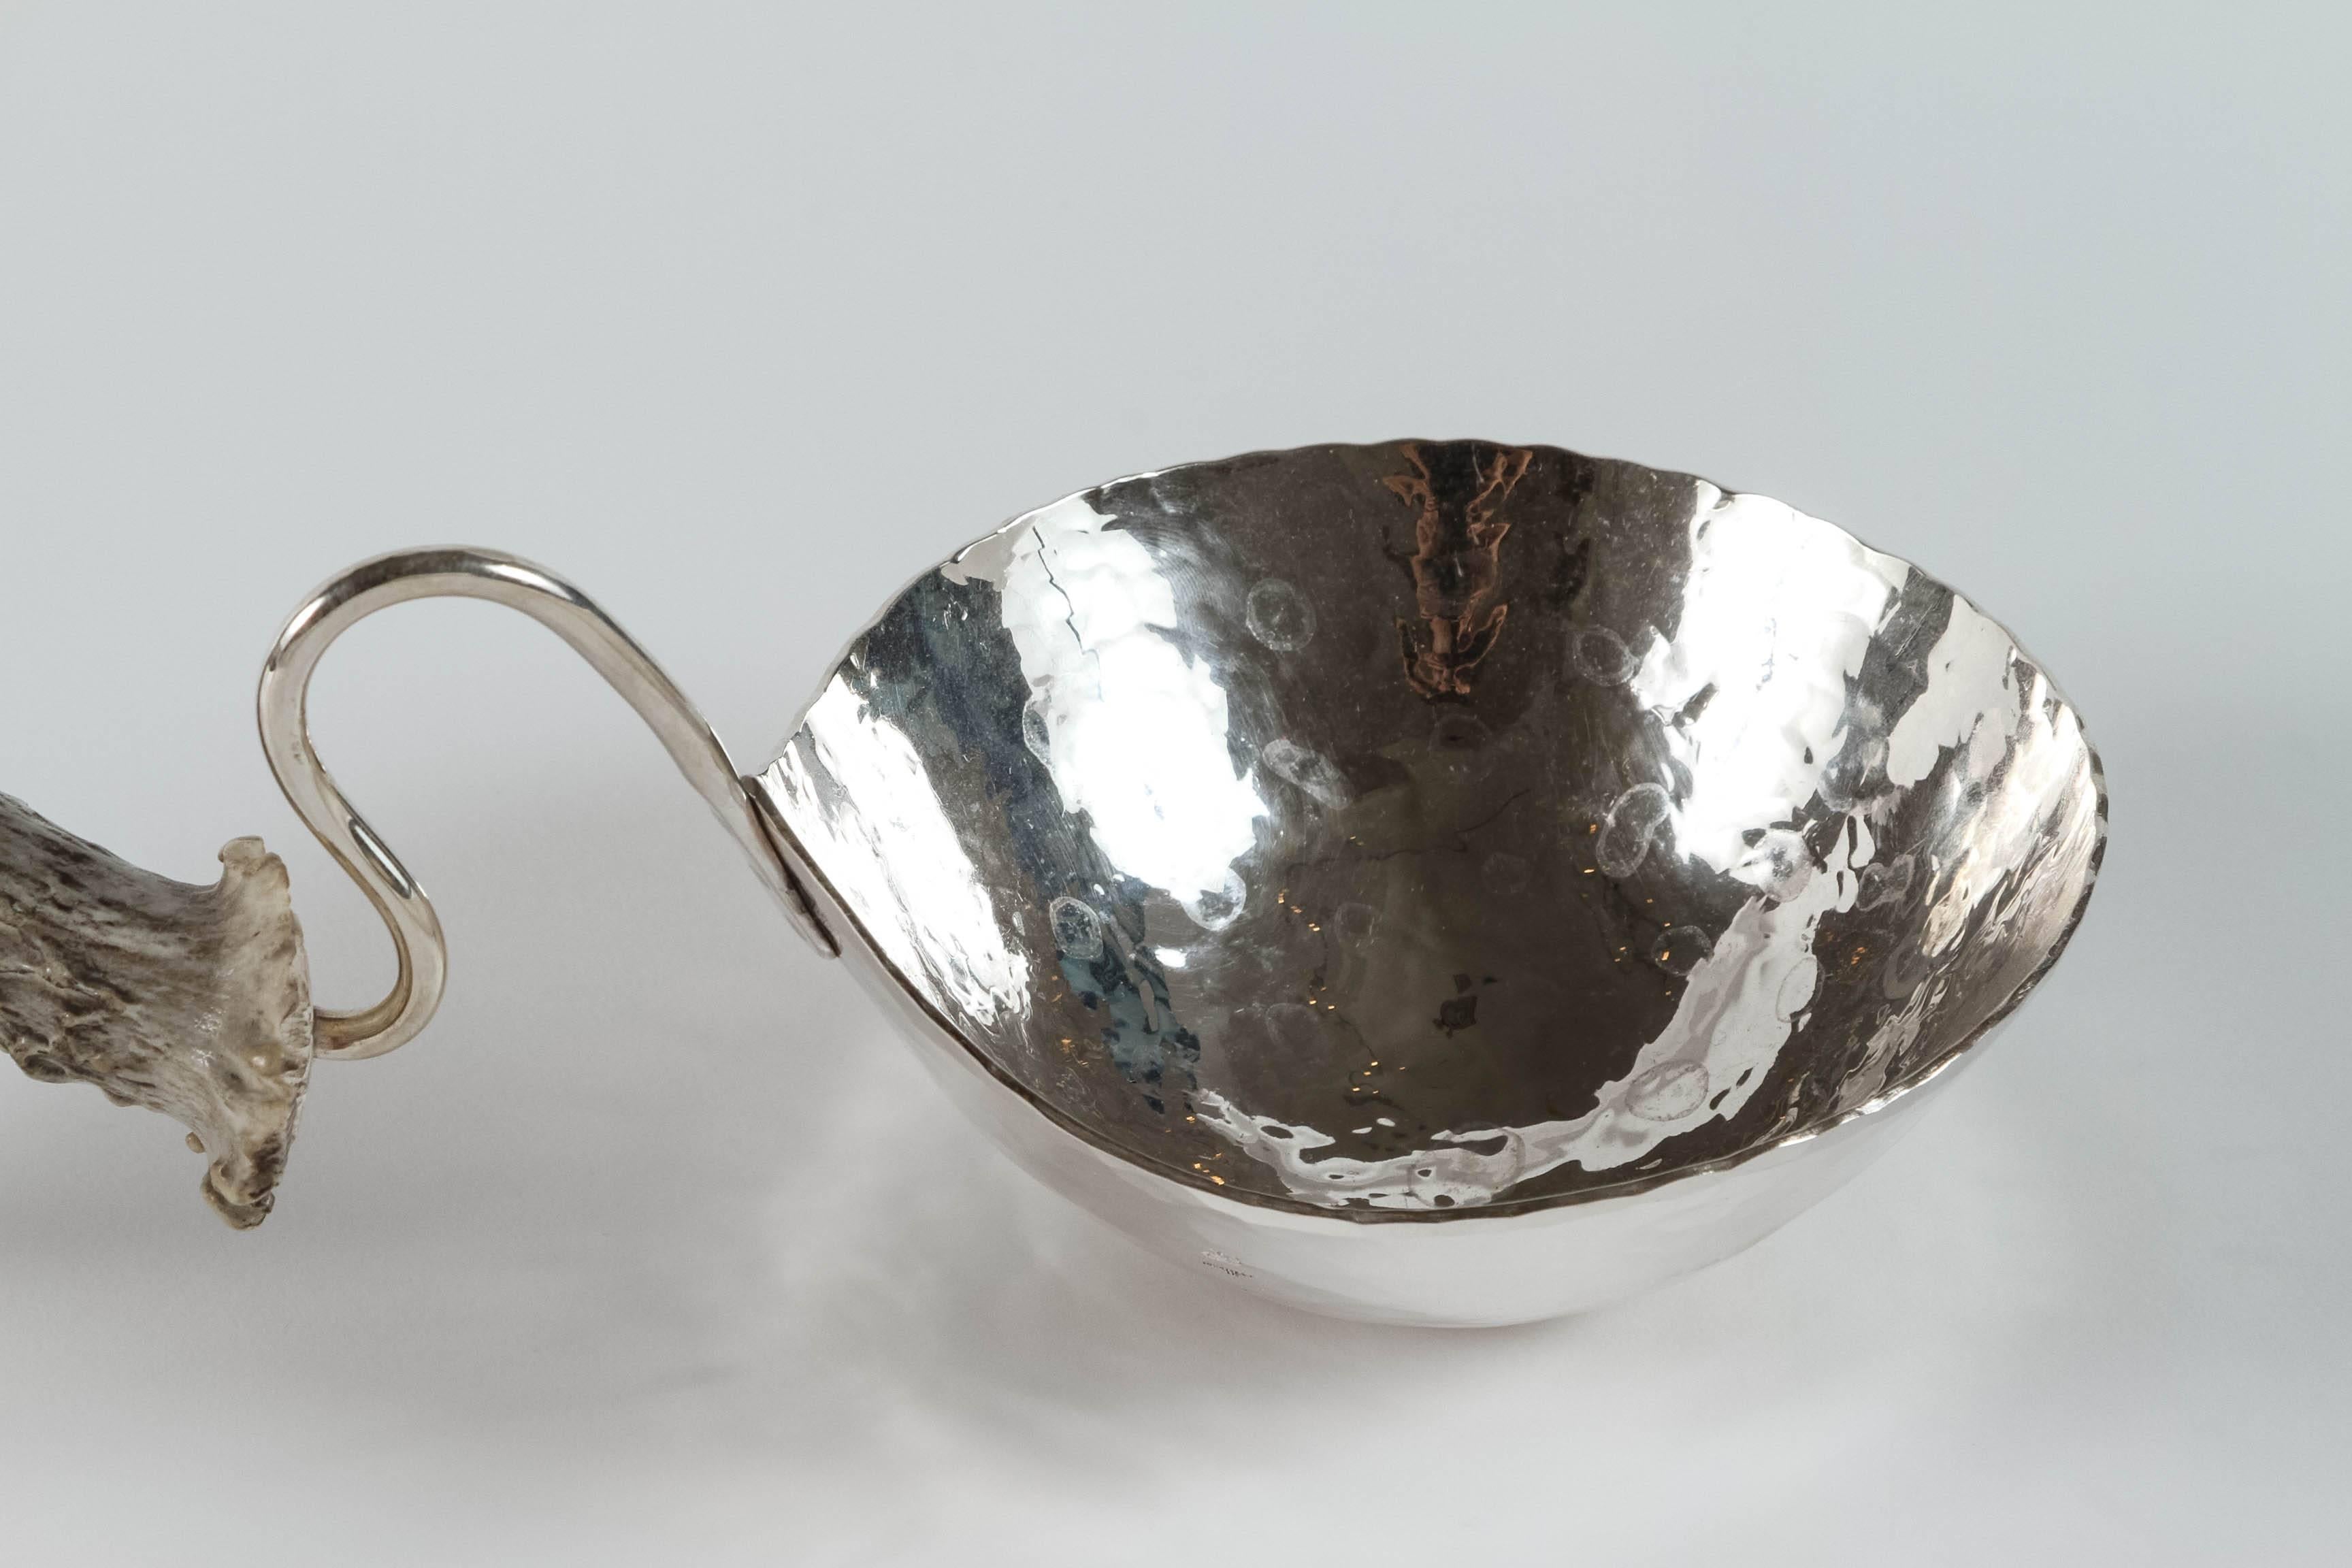 Hammered Silver Nut Bowl with Antler Handle by Ben Caldwell For Sale 2